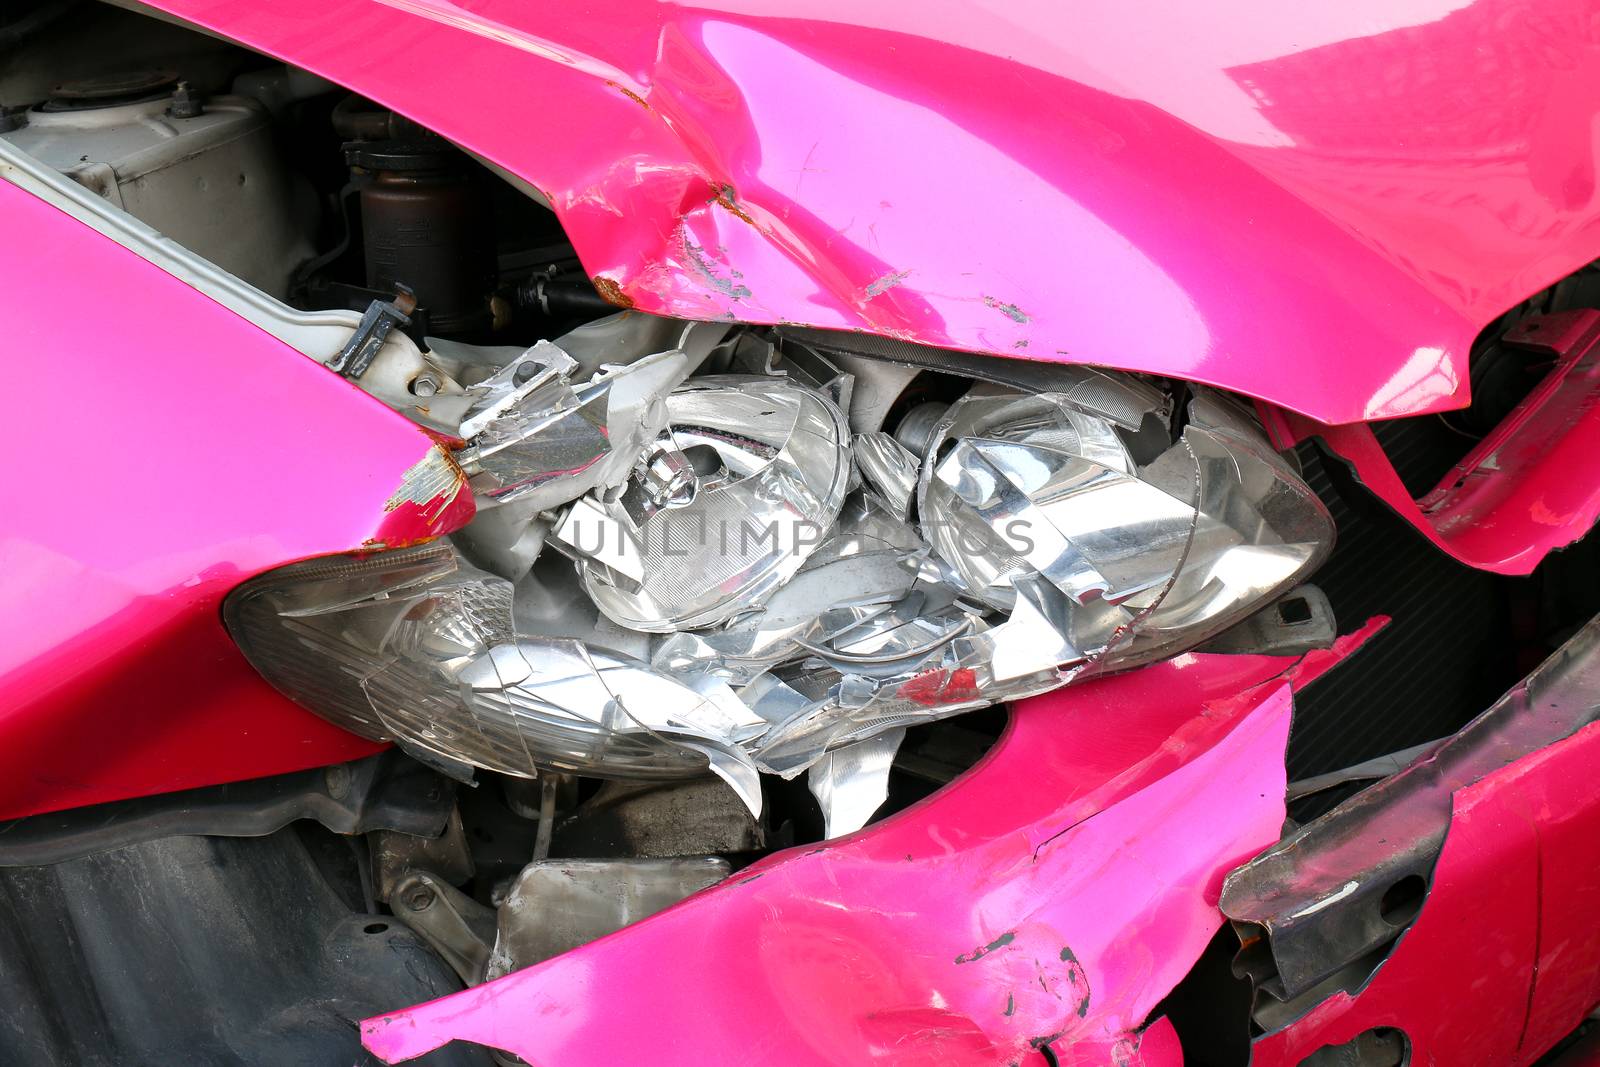 pink car accident damaged to headlights front, broken headlights car crash accident, damaged automobiles after collision of pink car accident by cgdeaw